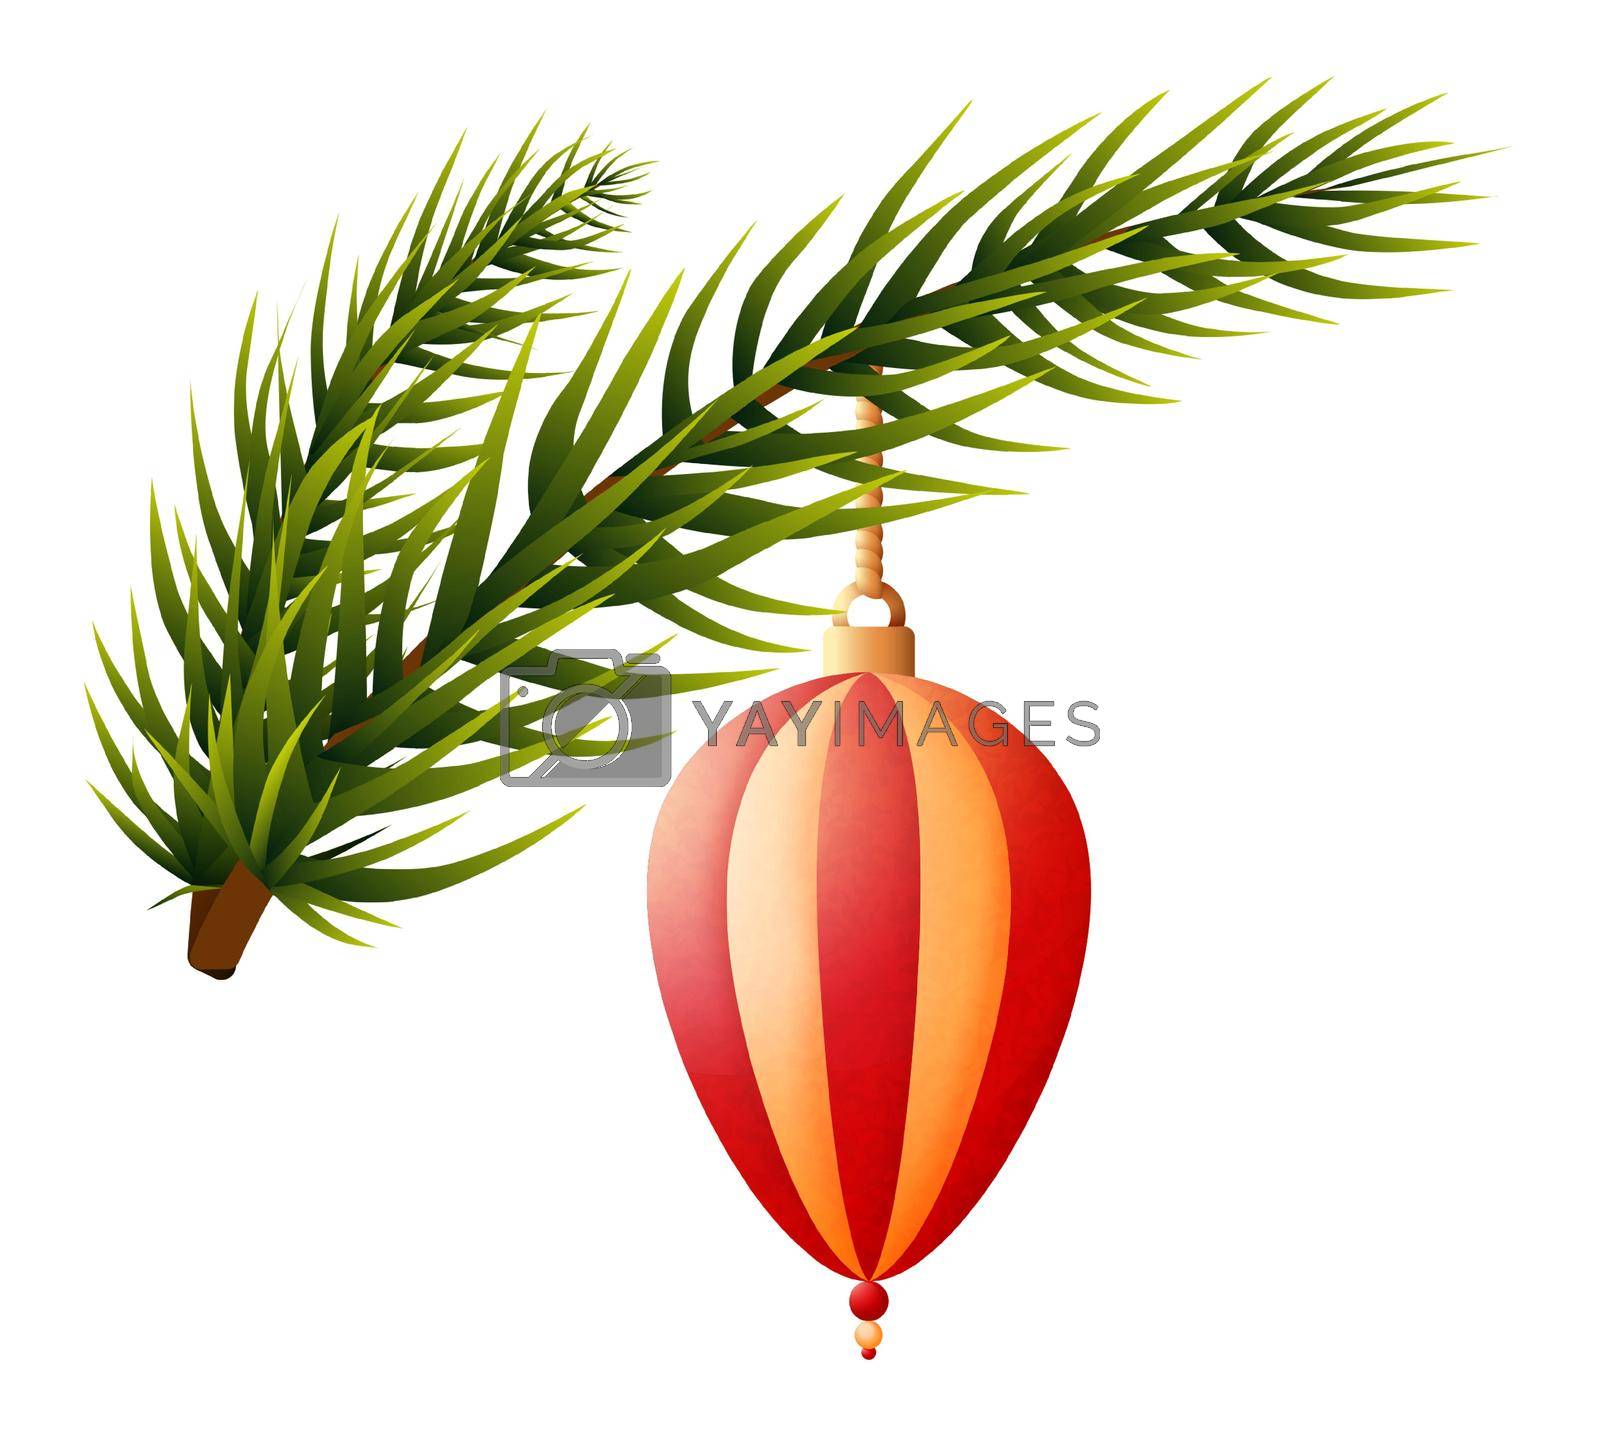 Royalty free image of Christmas decoration hanging on pine tree branch by LadadikArt